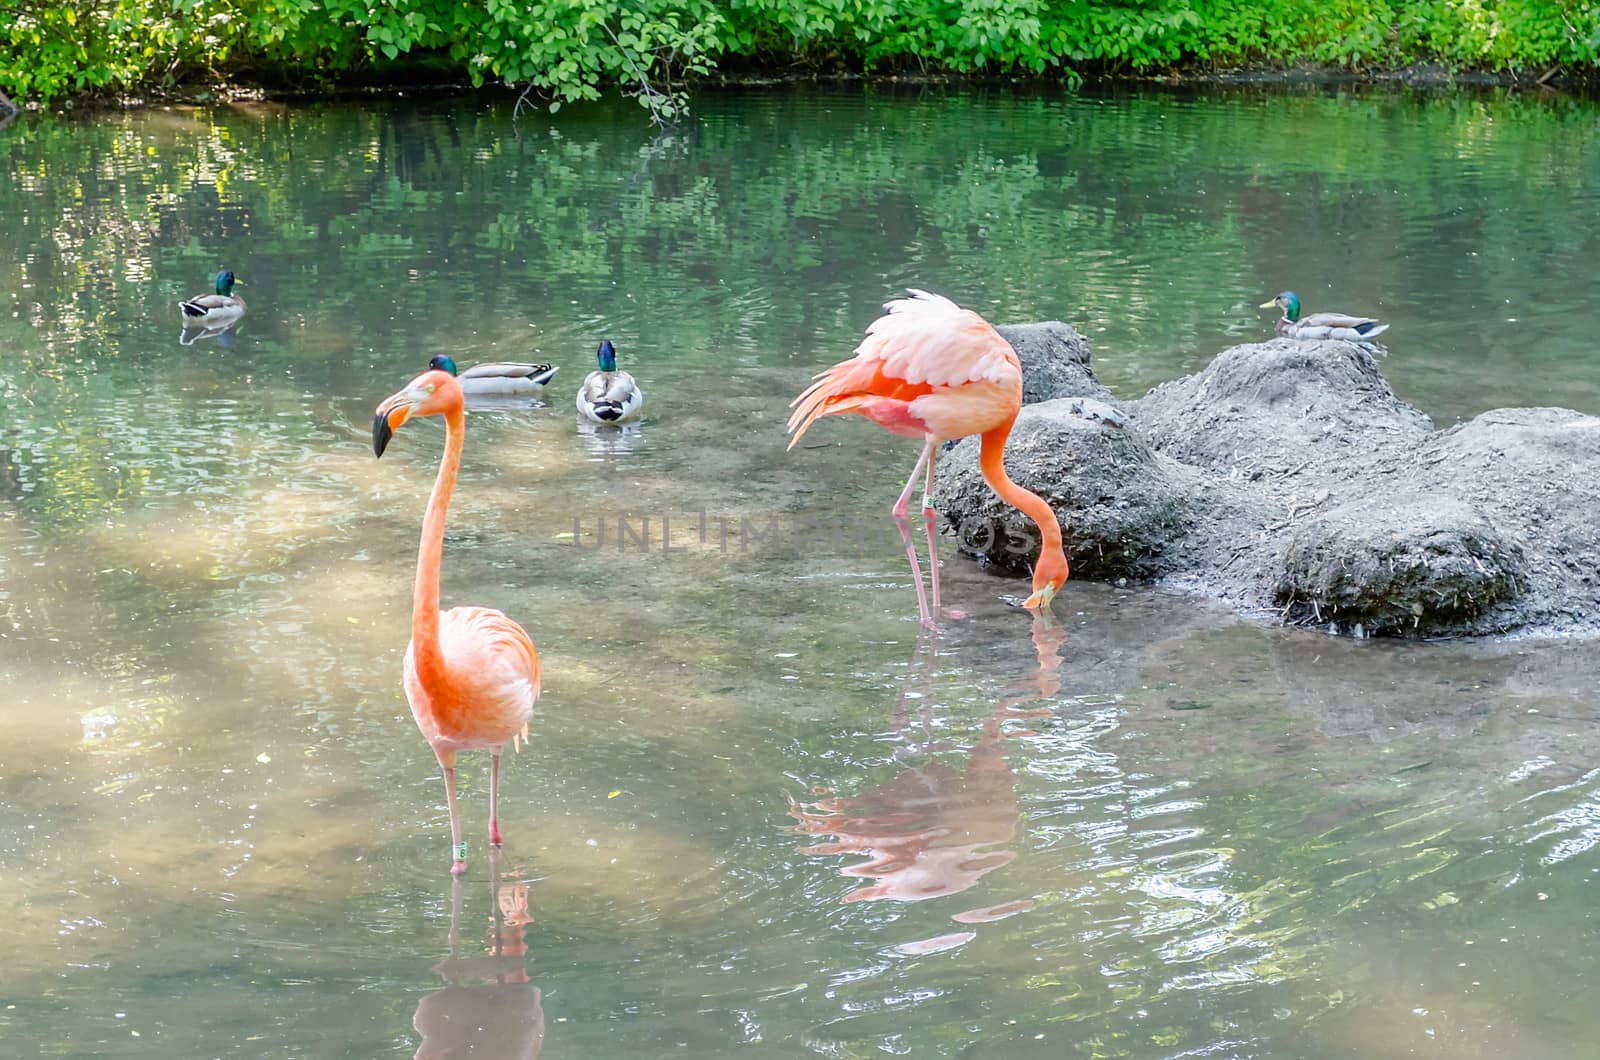 A group of colorful flamingos bathing in the pond